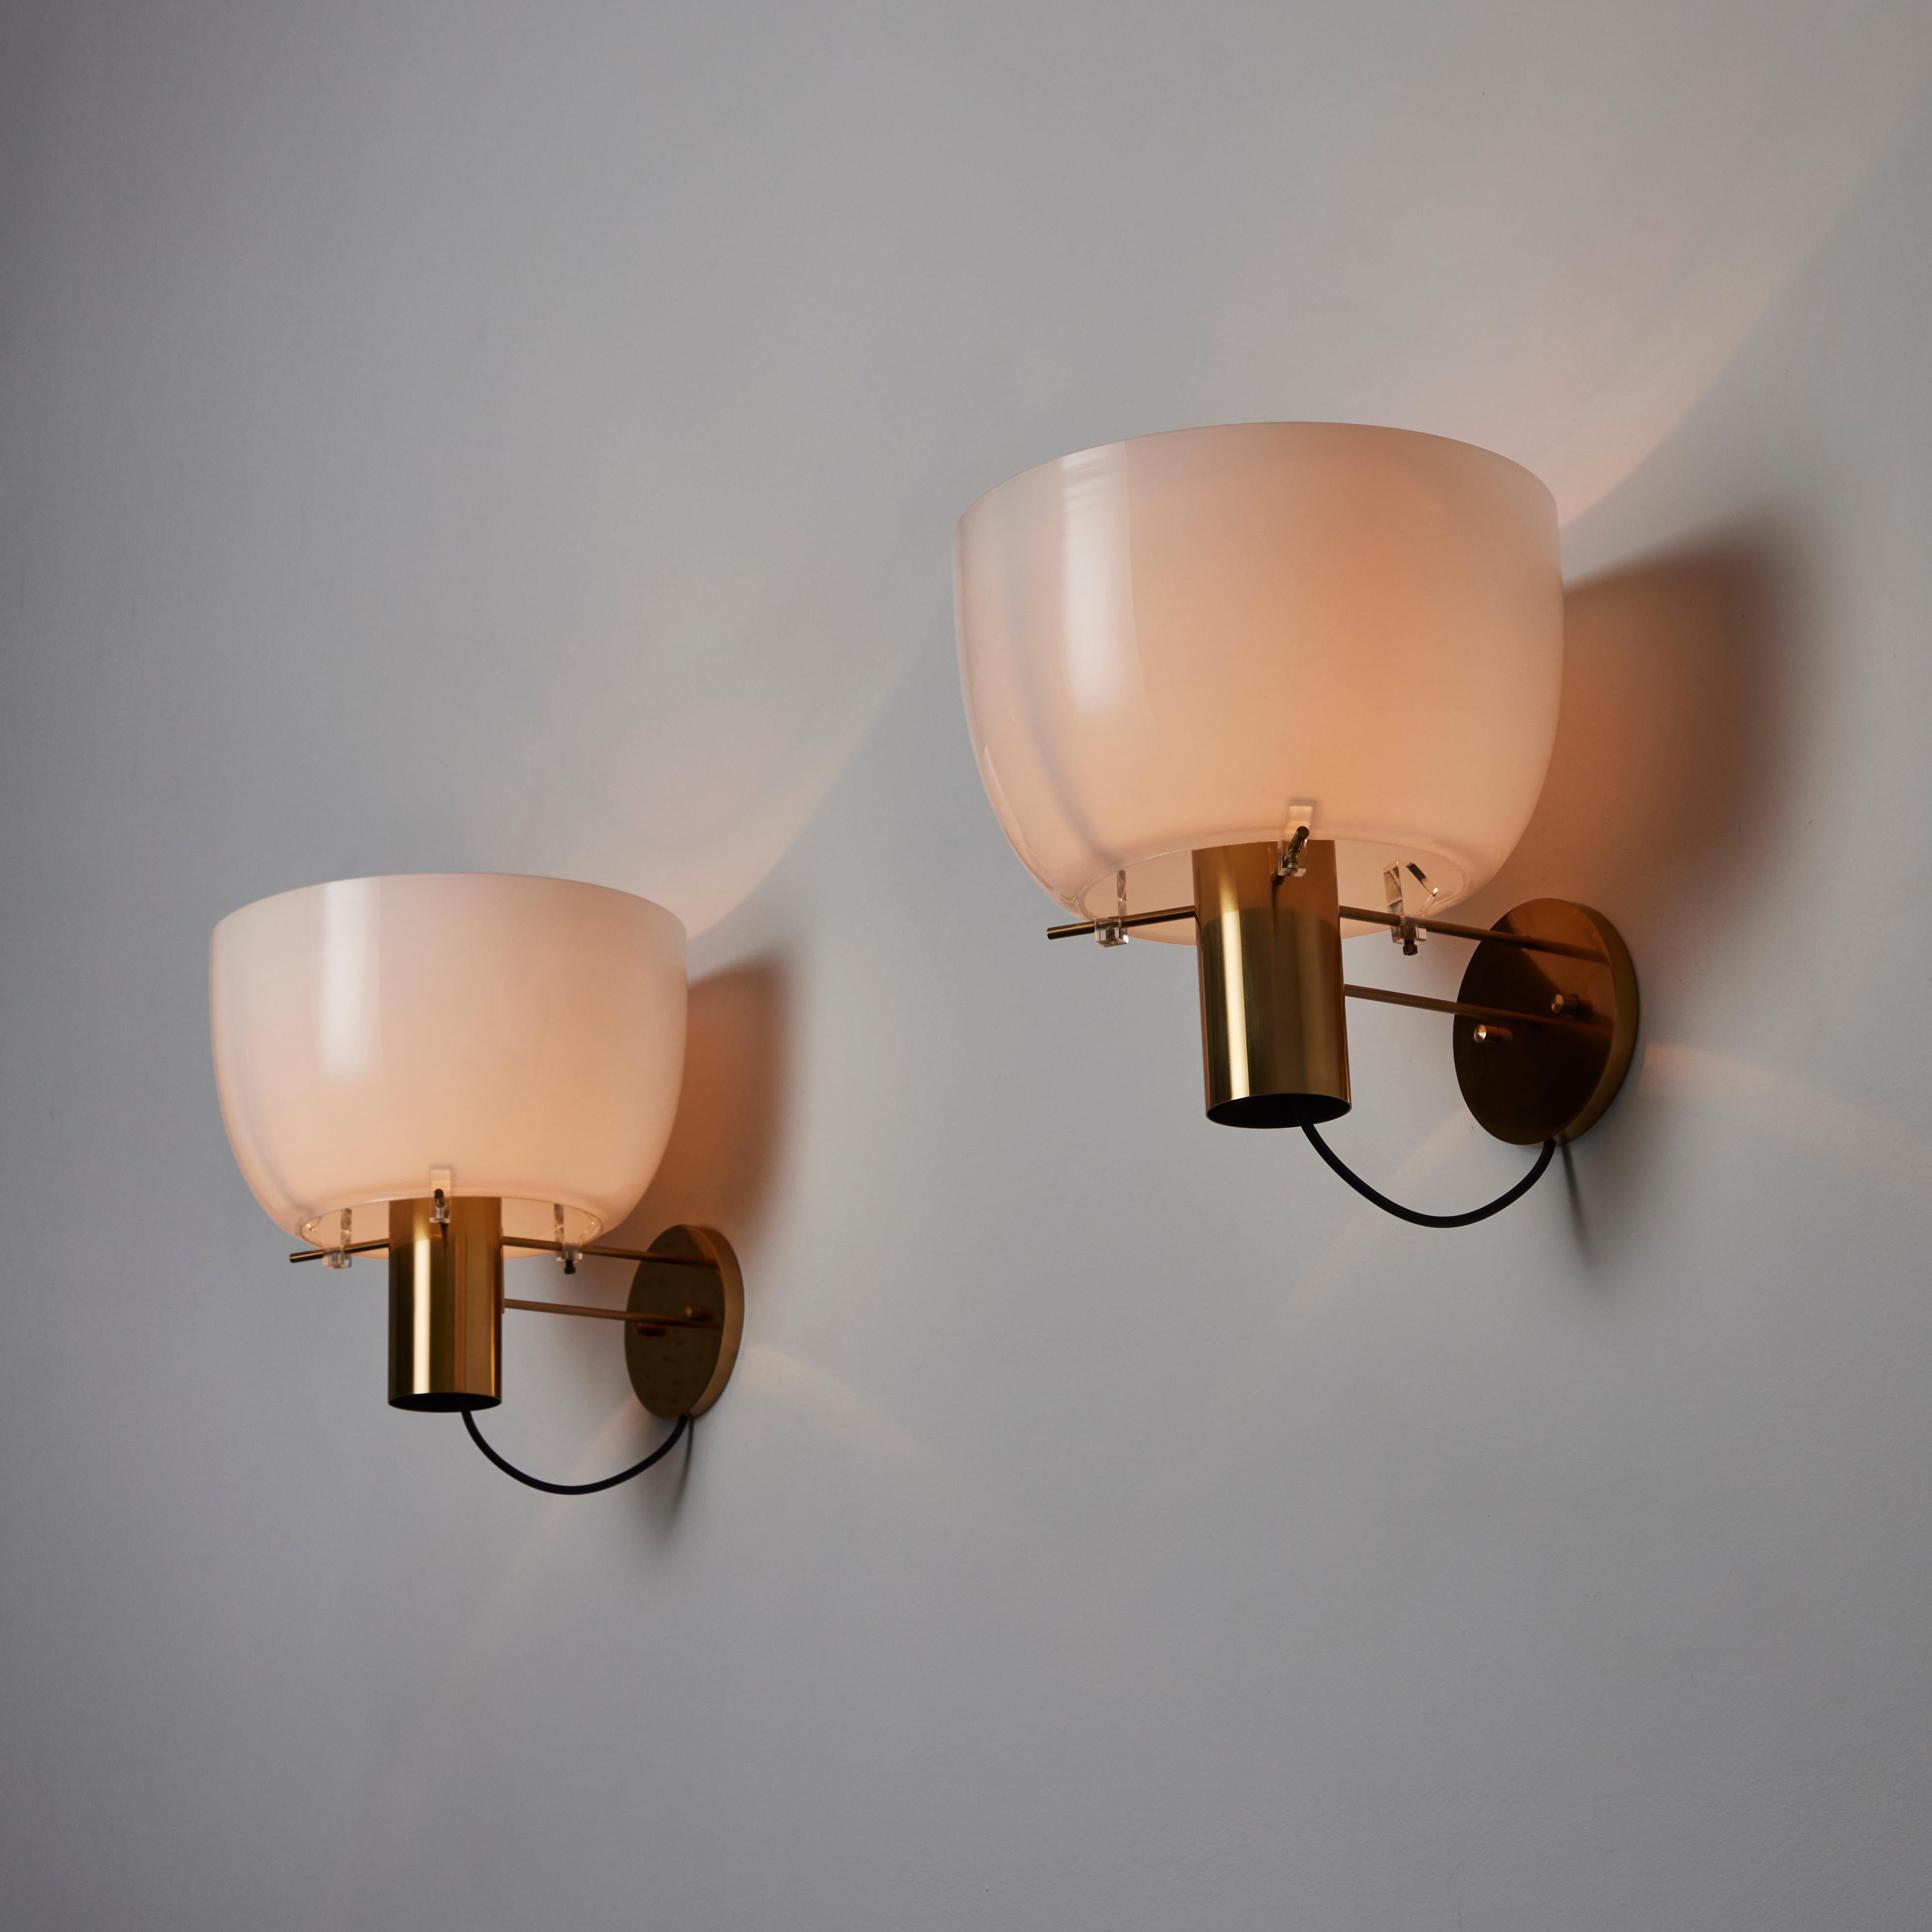 Pair of Model 1121 Sconces by Ostuni & Forti for Oluce. Designed and manufactured in Italy, circa the 1960's. Opaline glass diffusers, orange interior acrylic ring, and lacquered brass armature. Wired for U.S. standards. We recommend a 40w max bulb.